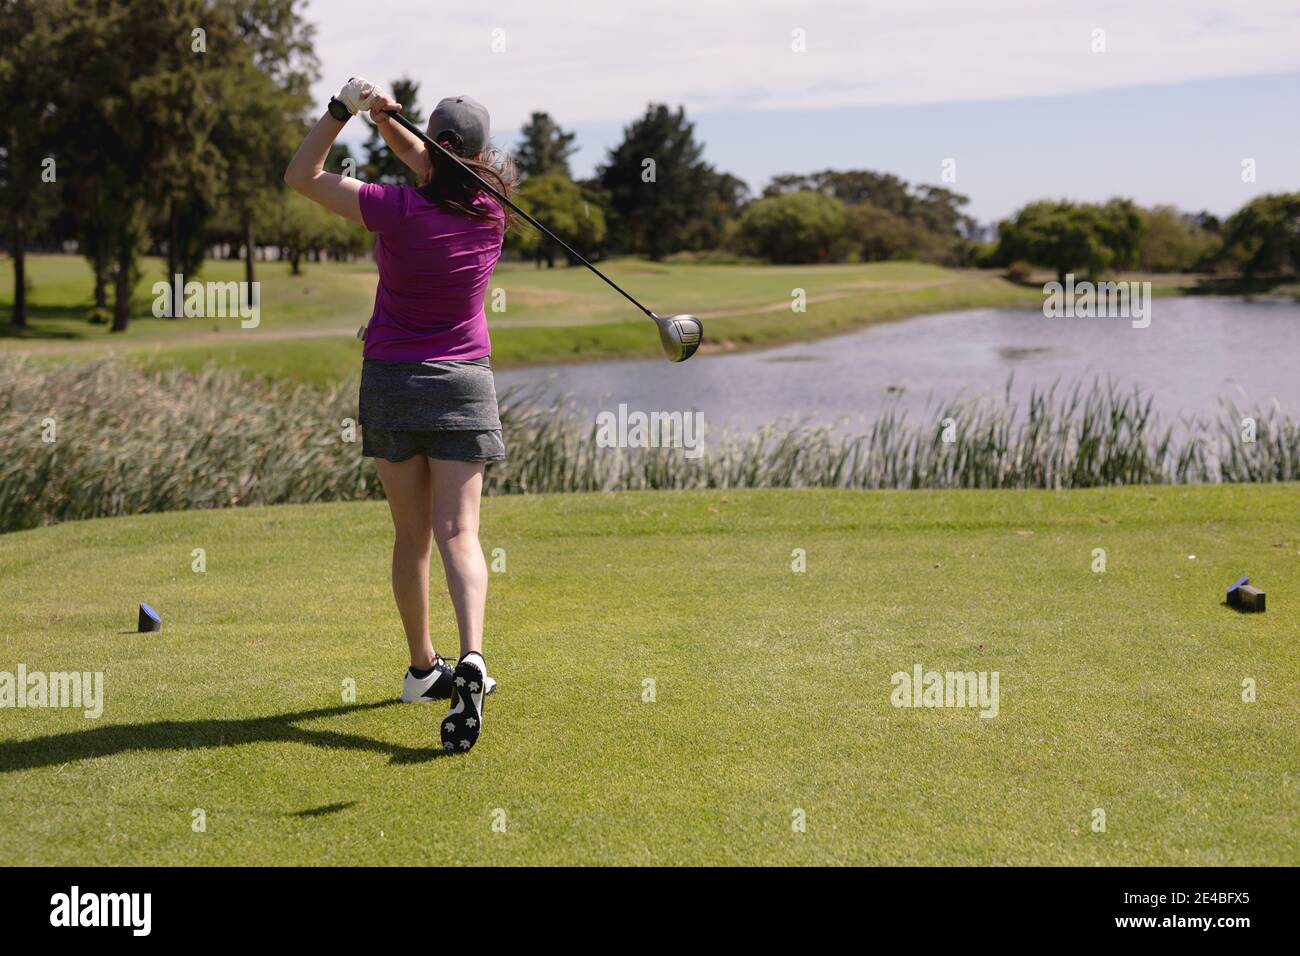 Caucasian woman playing golf swinging club and taking a shot Stock Photo